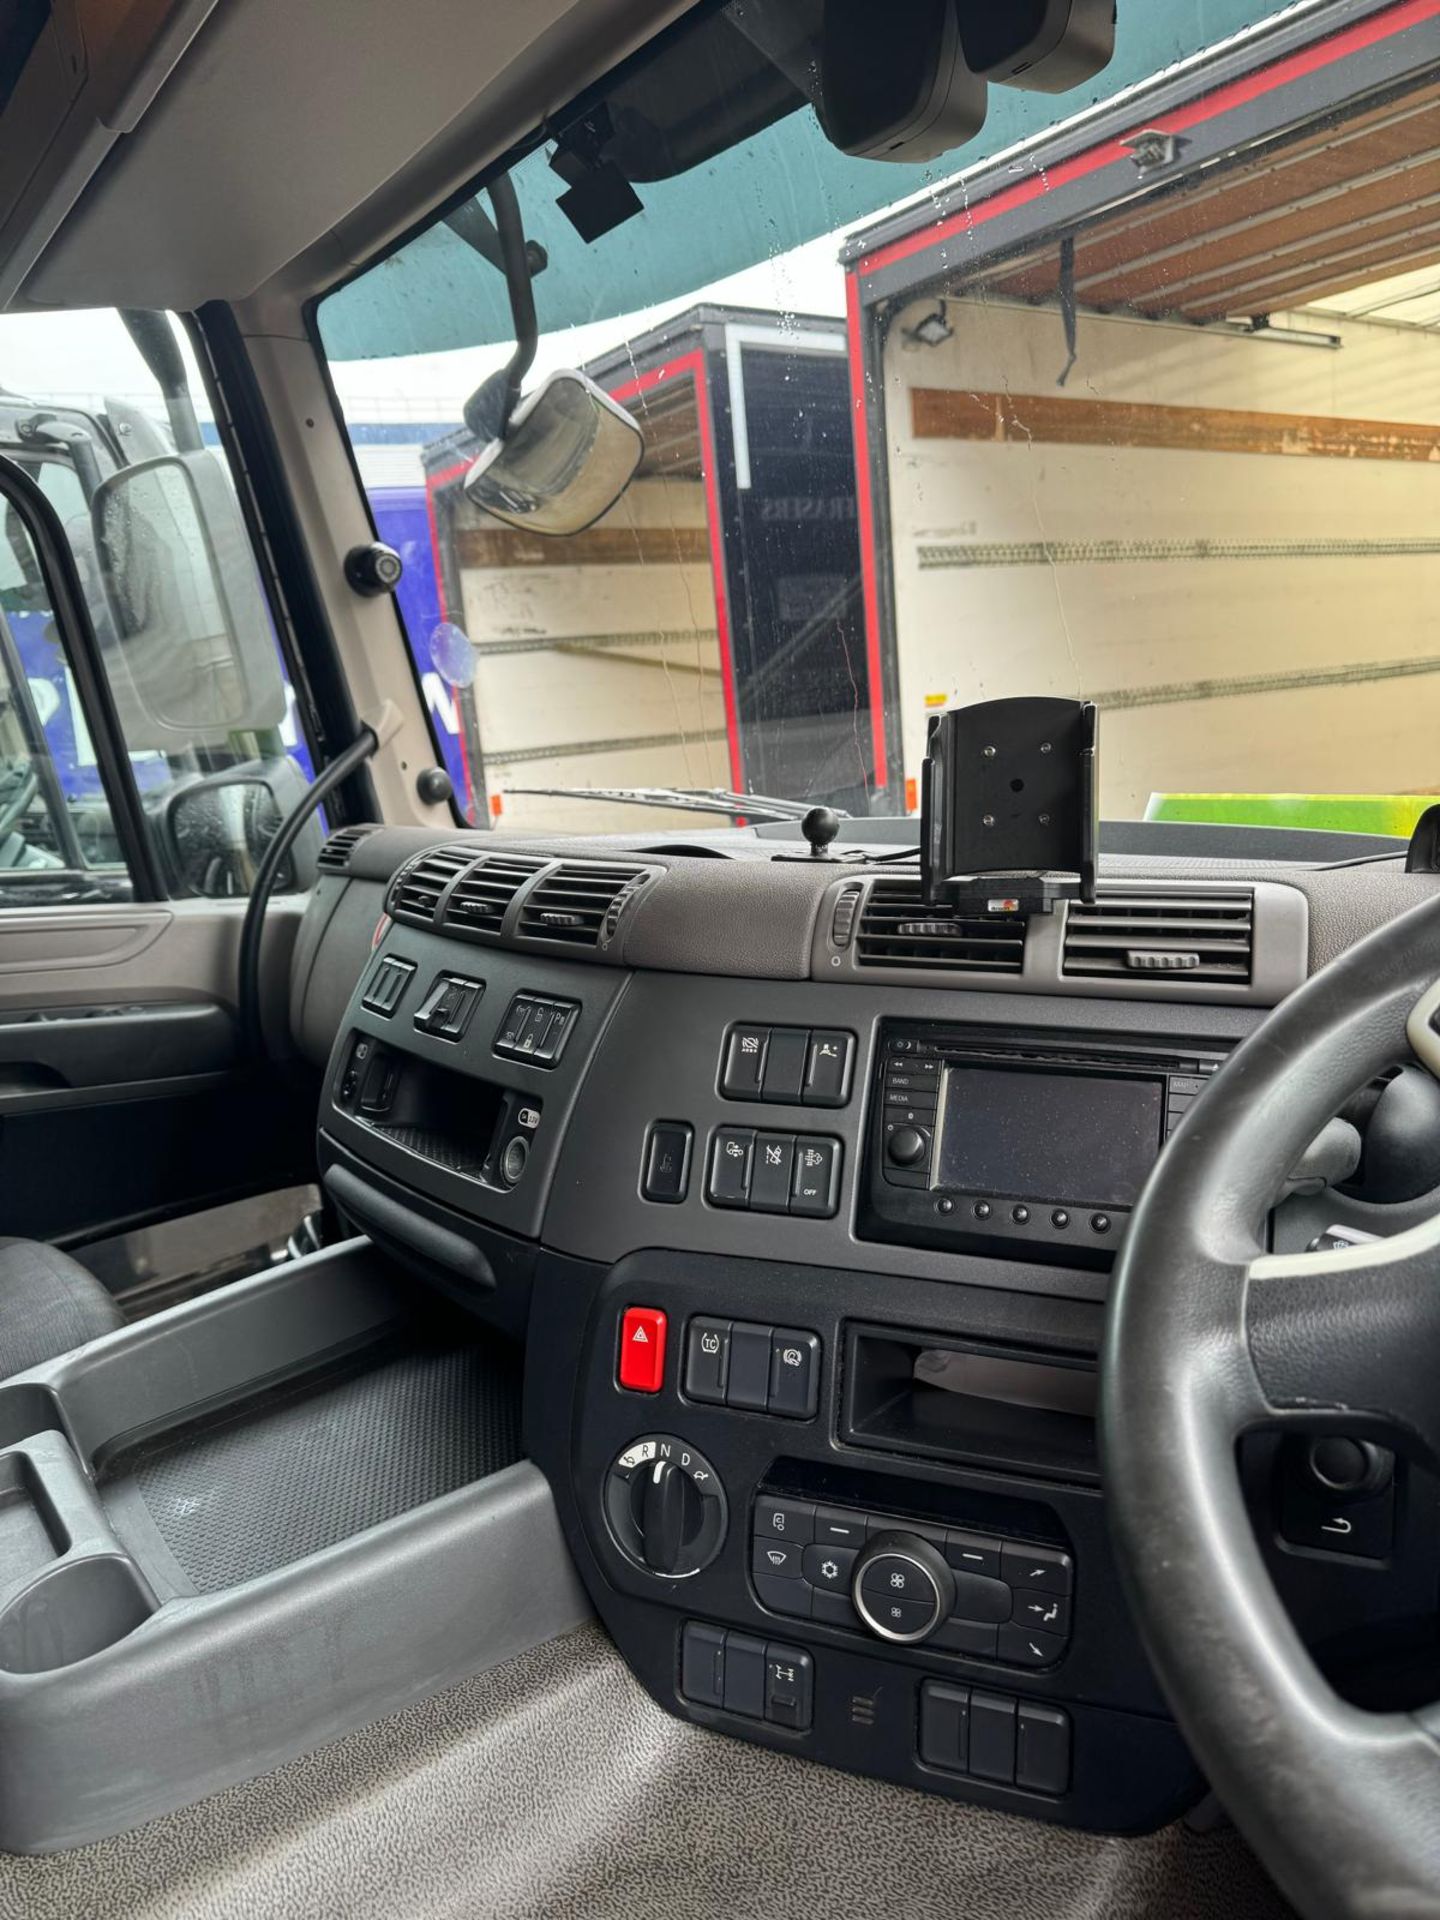 2019, DAF CF 260 FA (Ex-Fleet Owned & Maintained) - FN69 AXD (18 Ton Rigid Truck with Tail Lift) - Bild 16 aus 20